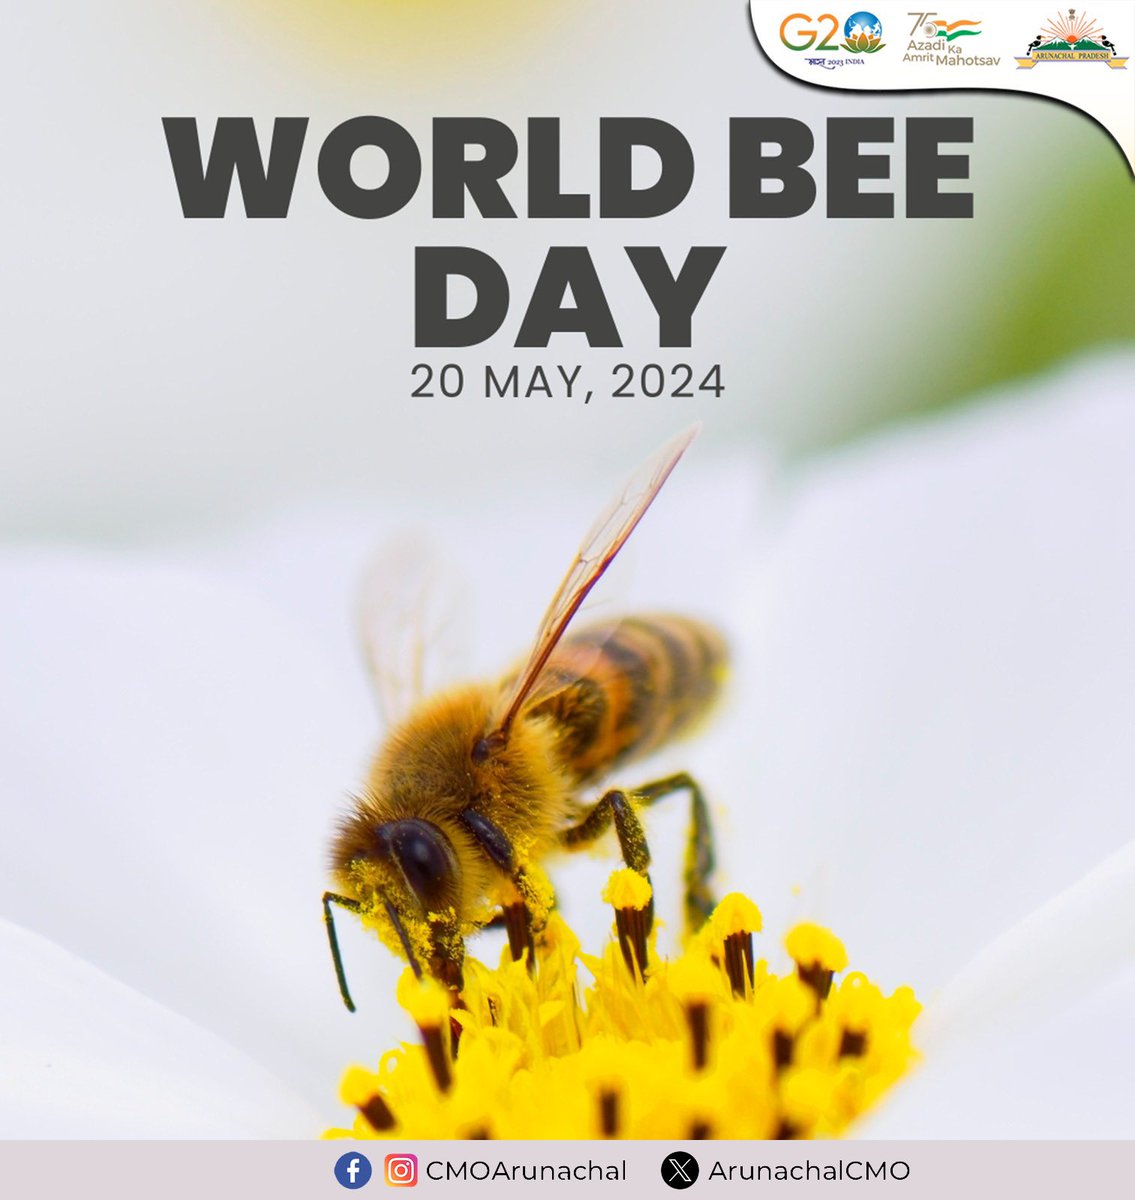 🐝 Happy #WorldBeeDay! 

Let's celebrate these incredible pollinators that play a crucial role in our ecosystem and agriculture. Protecting bees means protecting our planet's future.

Together, let's ensure a sustainable future for our planet. 🌍🌸 

#SaveTheBees